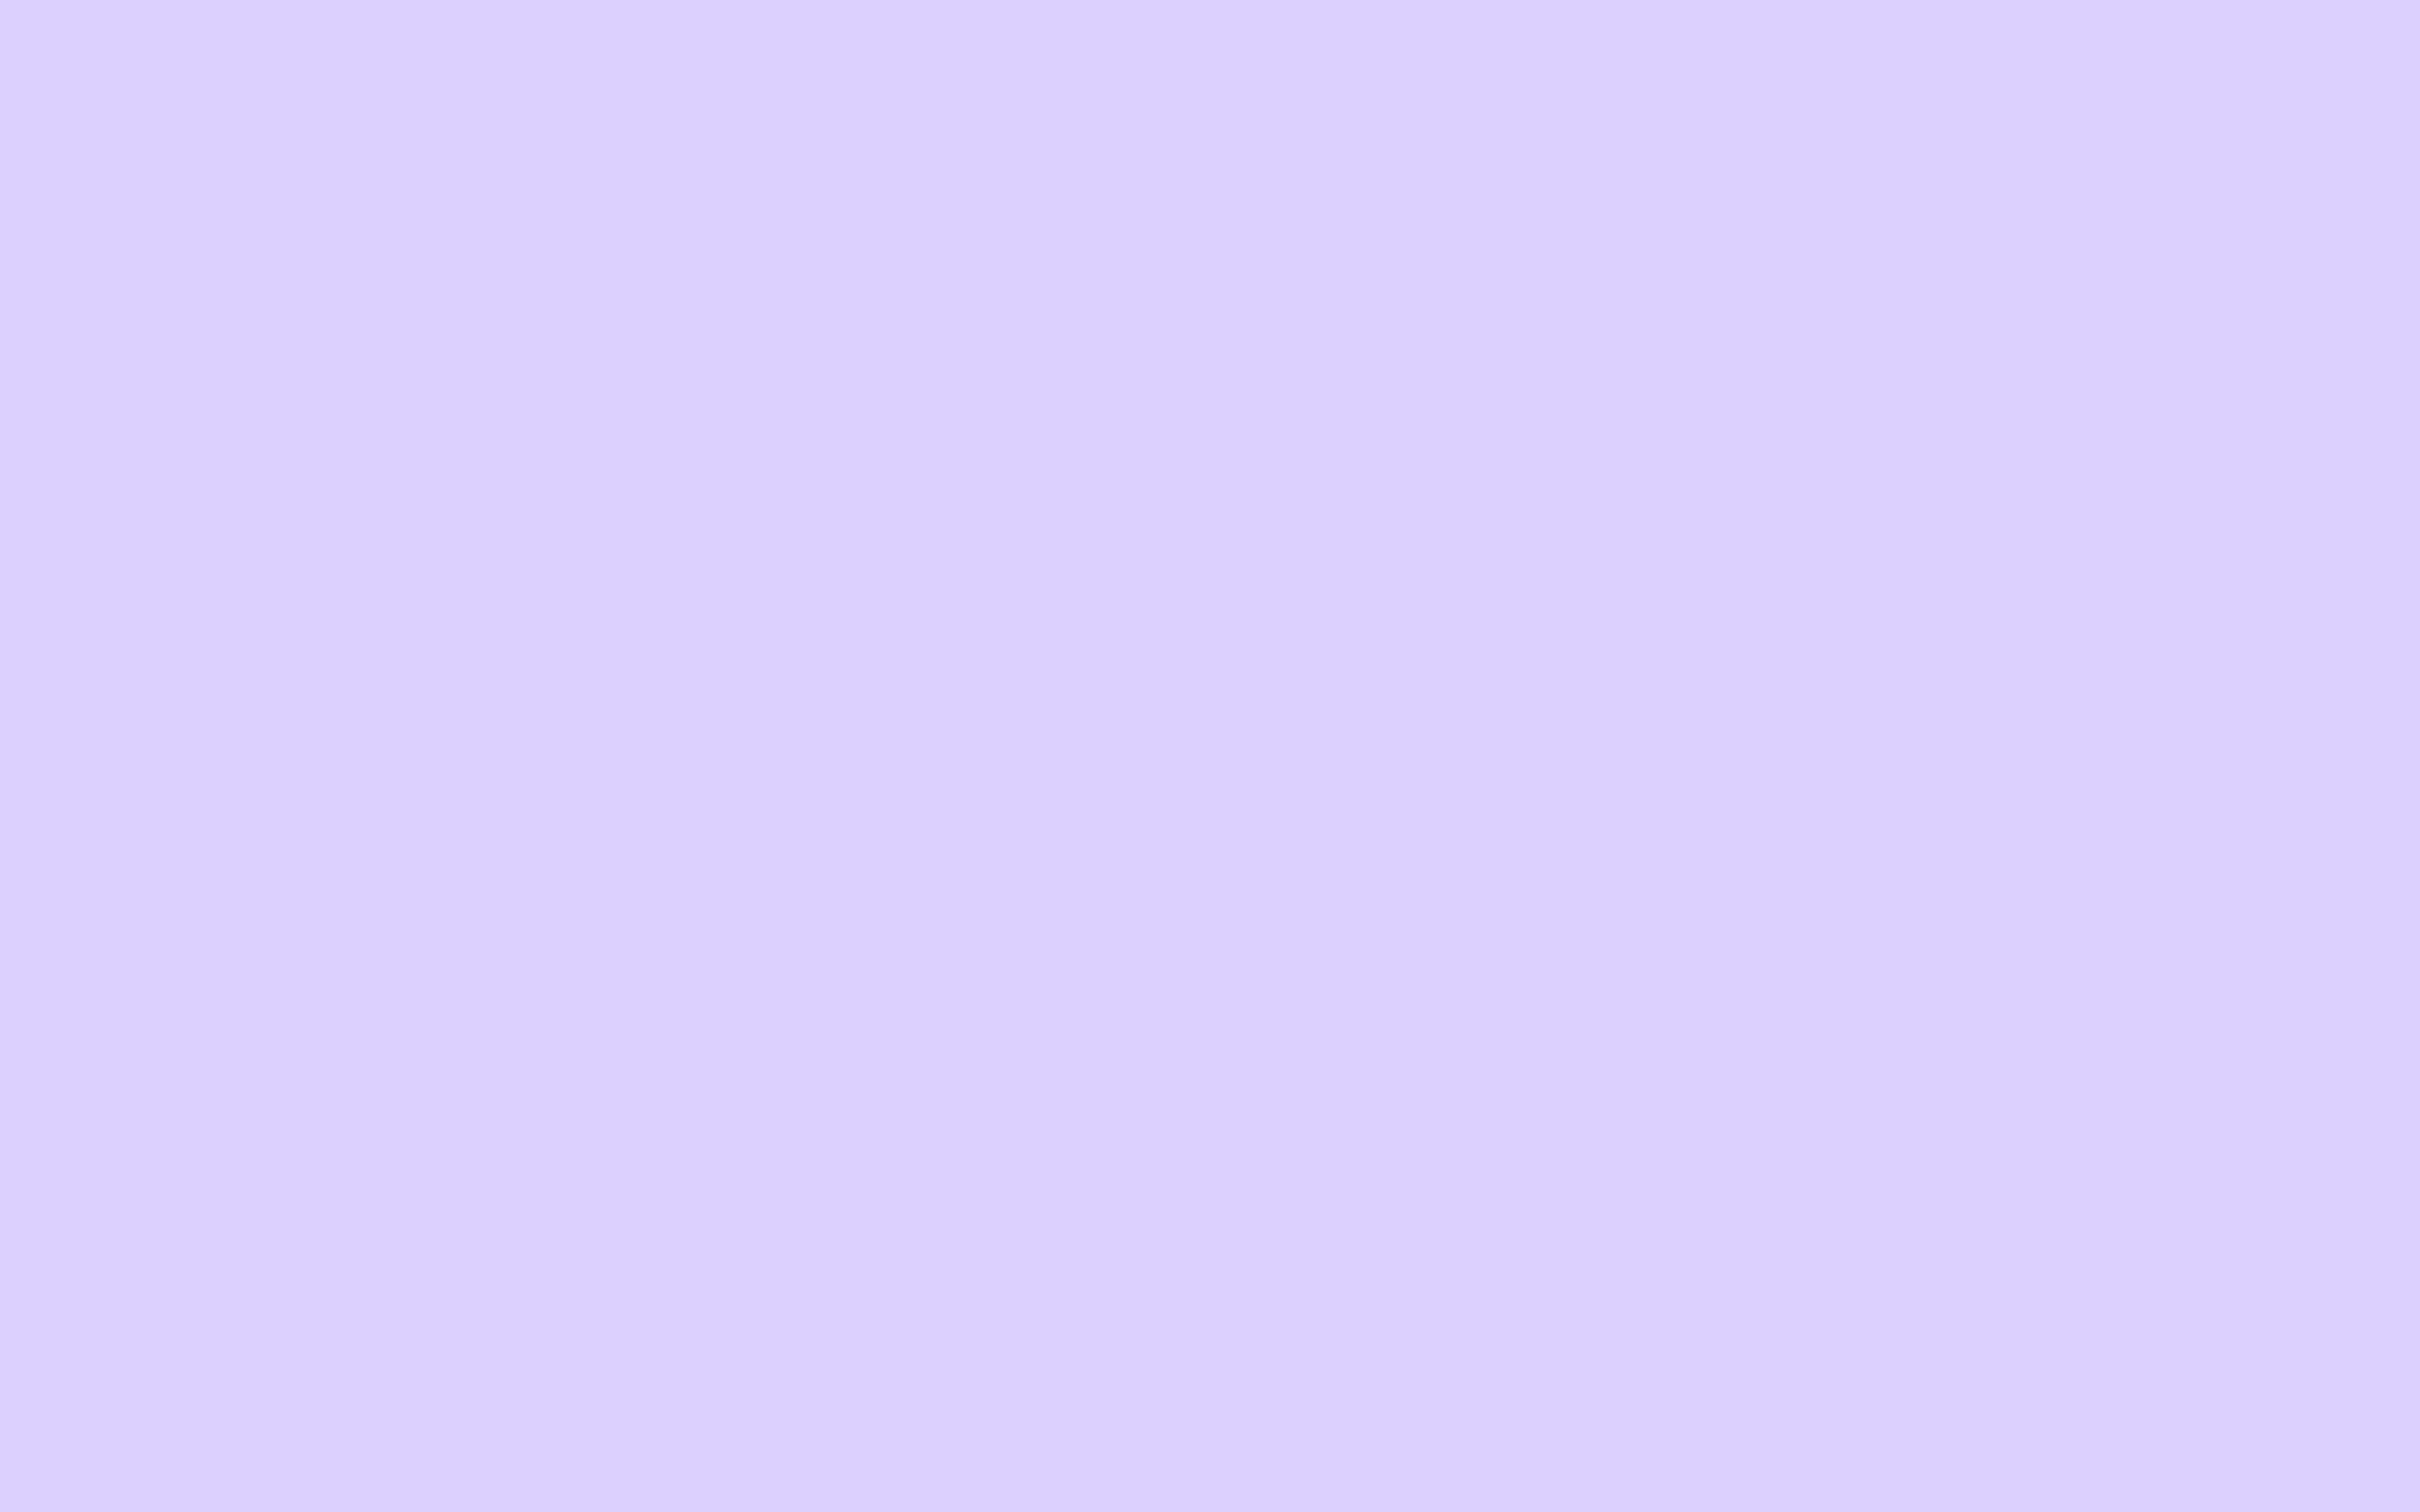 Free 2560x1600 resolution Pale Lavender solid color background view 2560x1600